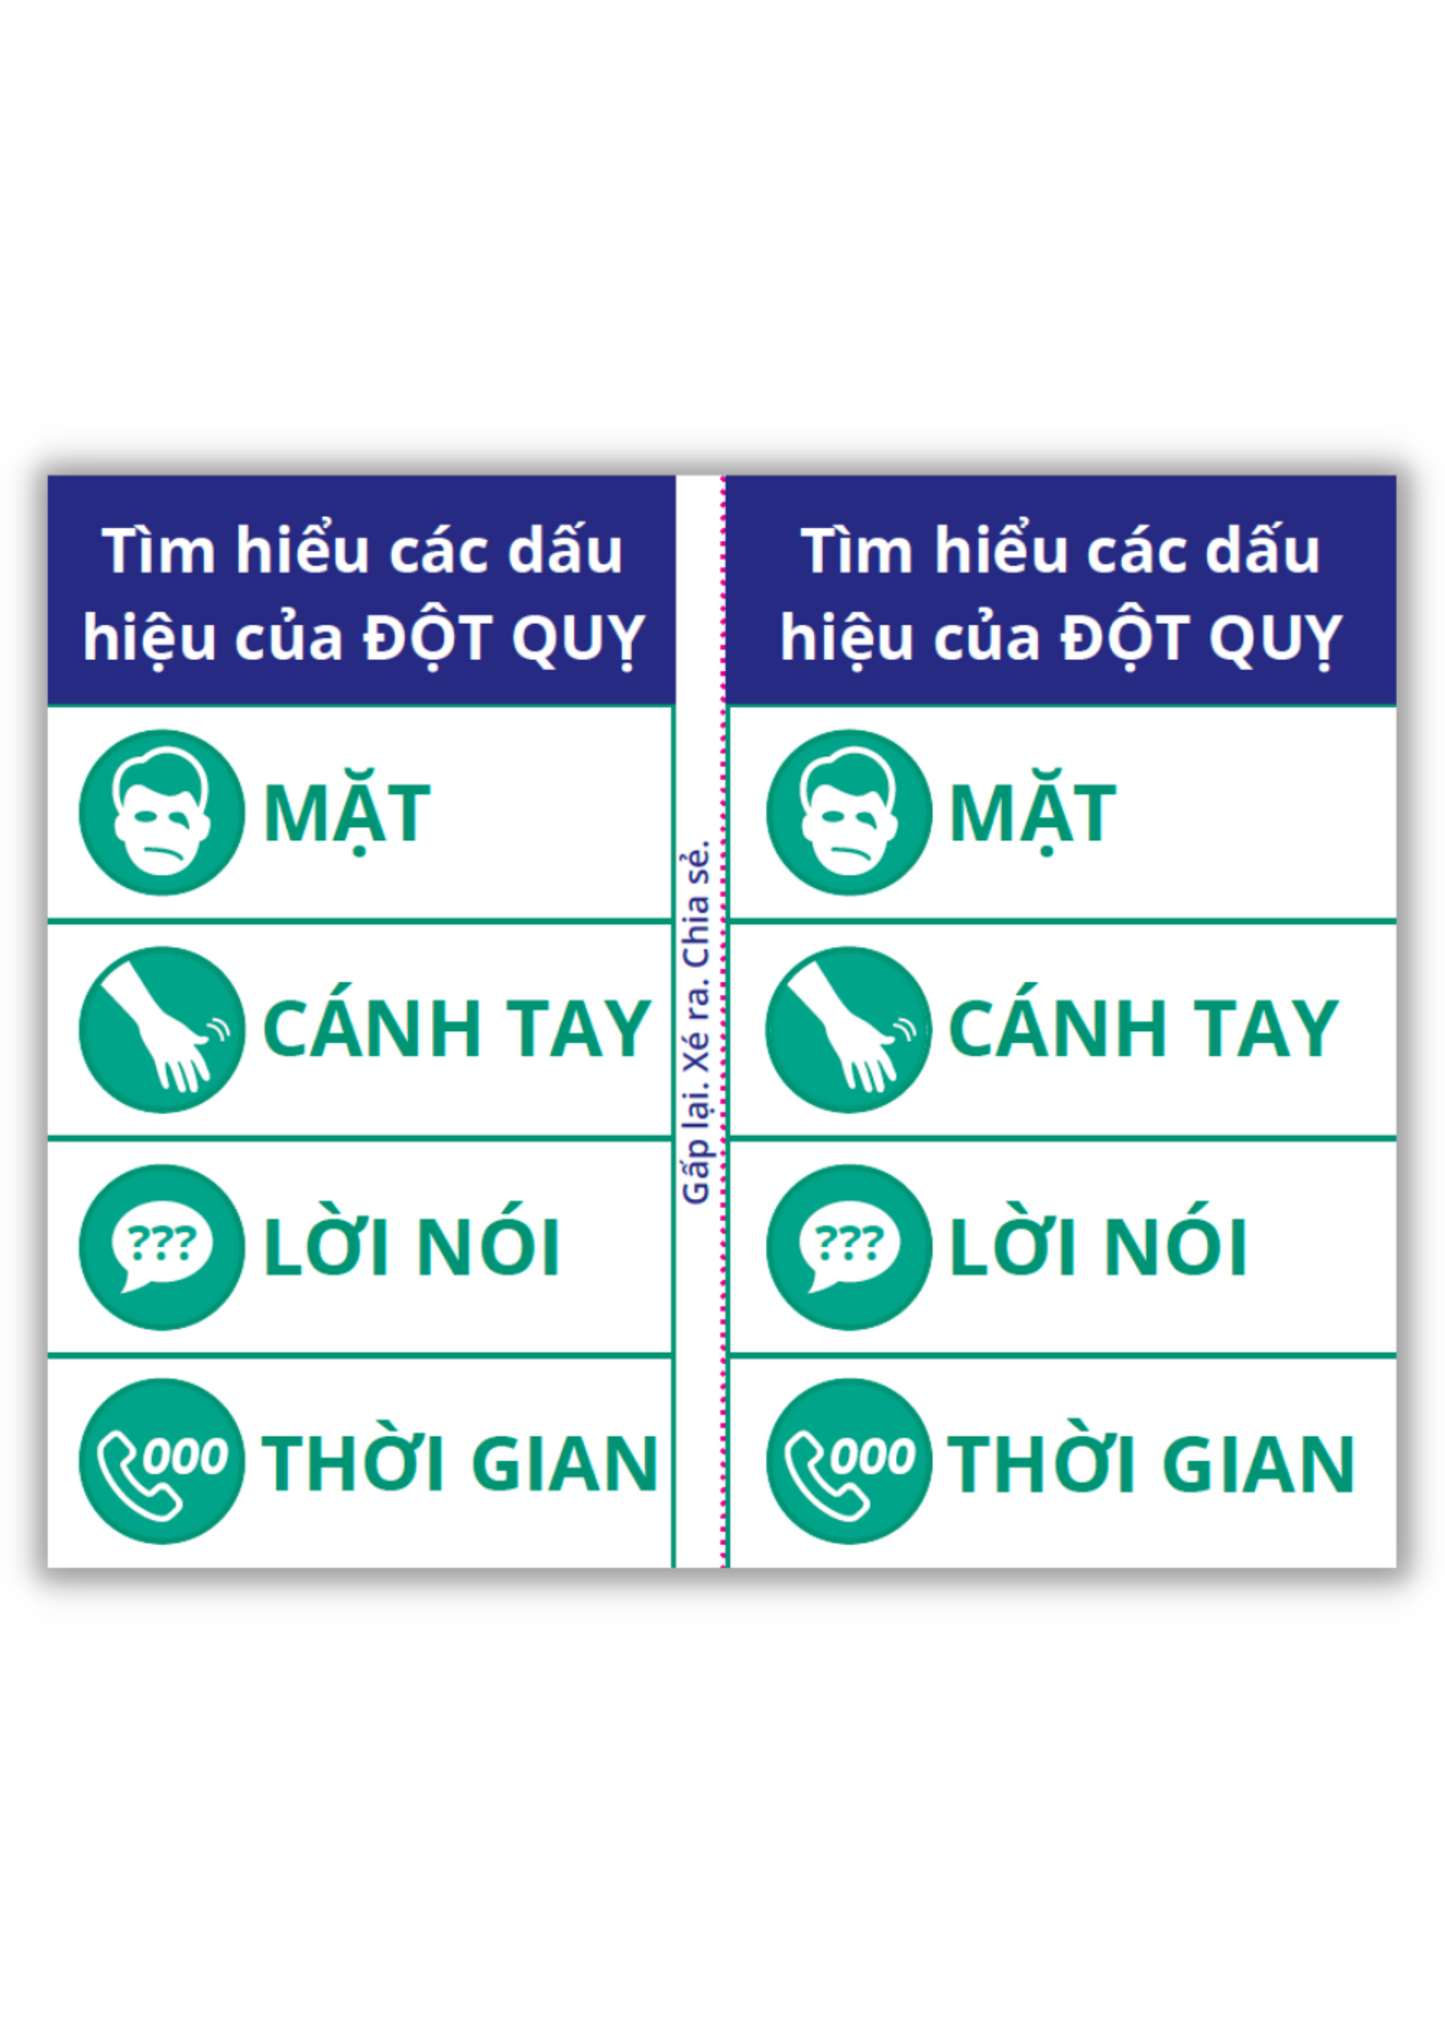 F.A.S.T. wallet cards - Tiếng Việt (Vietnamese) version (100 pack)